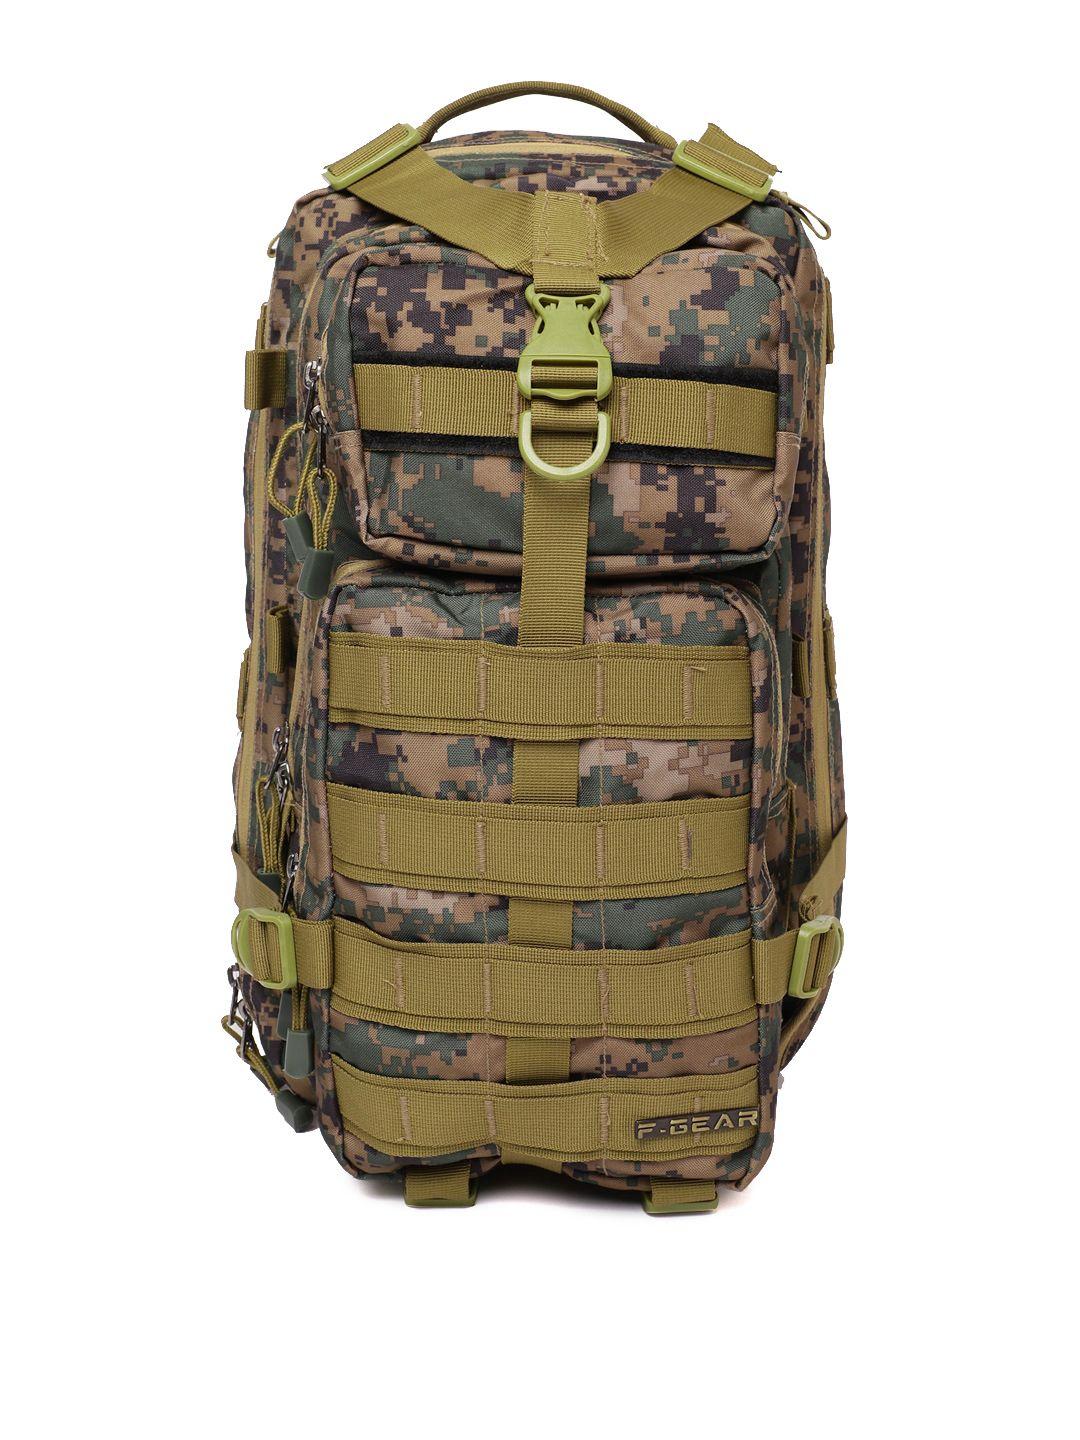 f gear unisex green & brown military tactical marpat graphic printed backpack